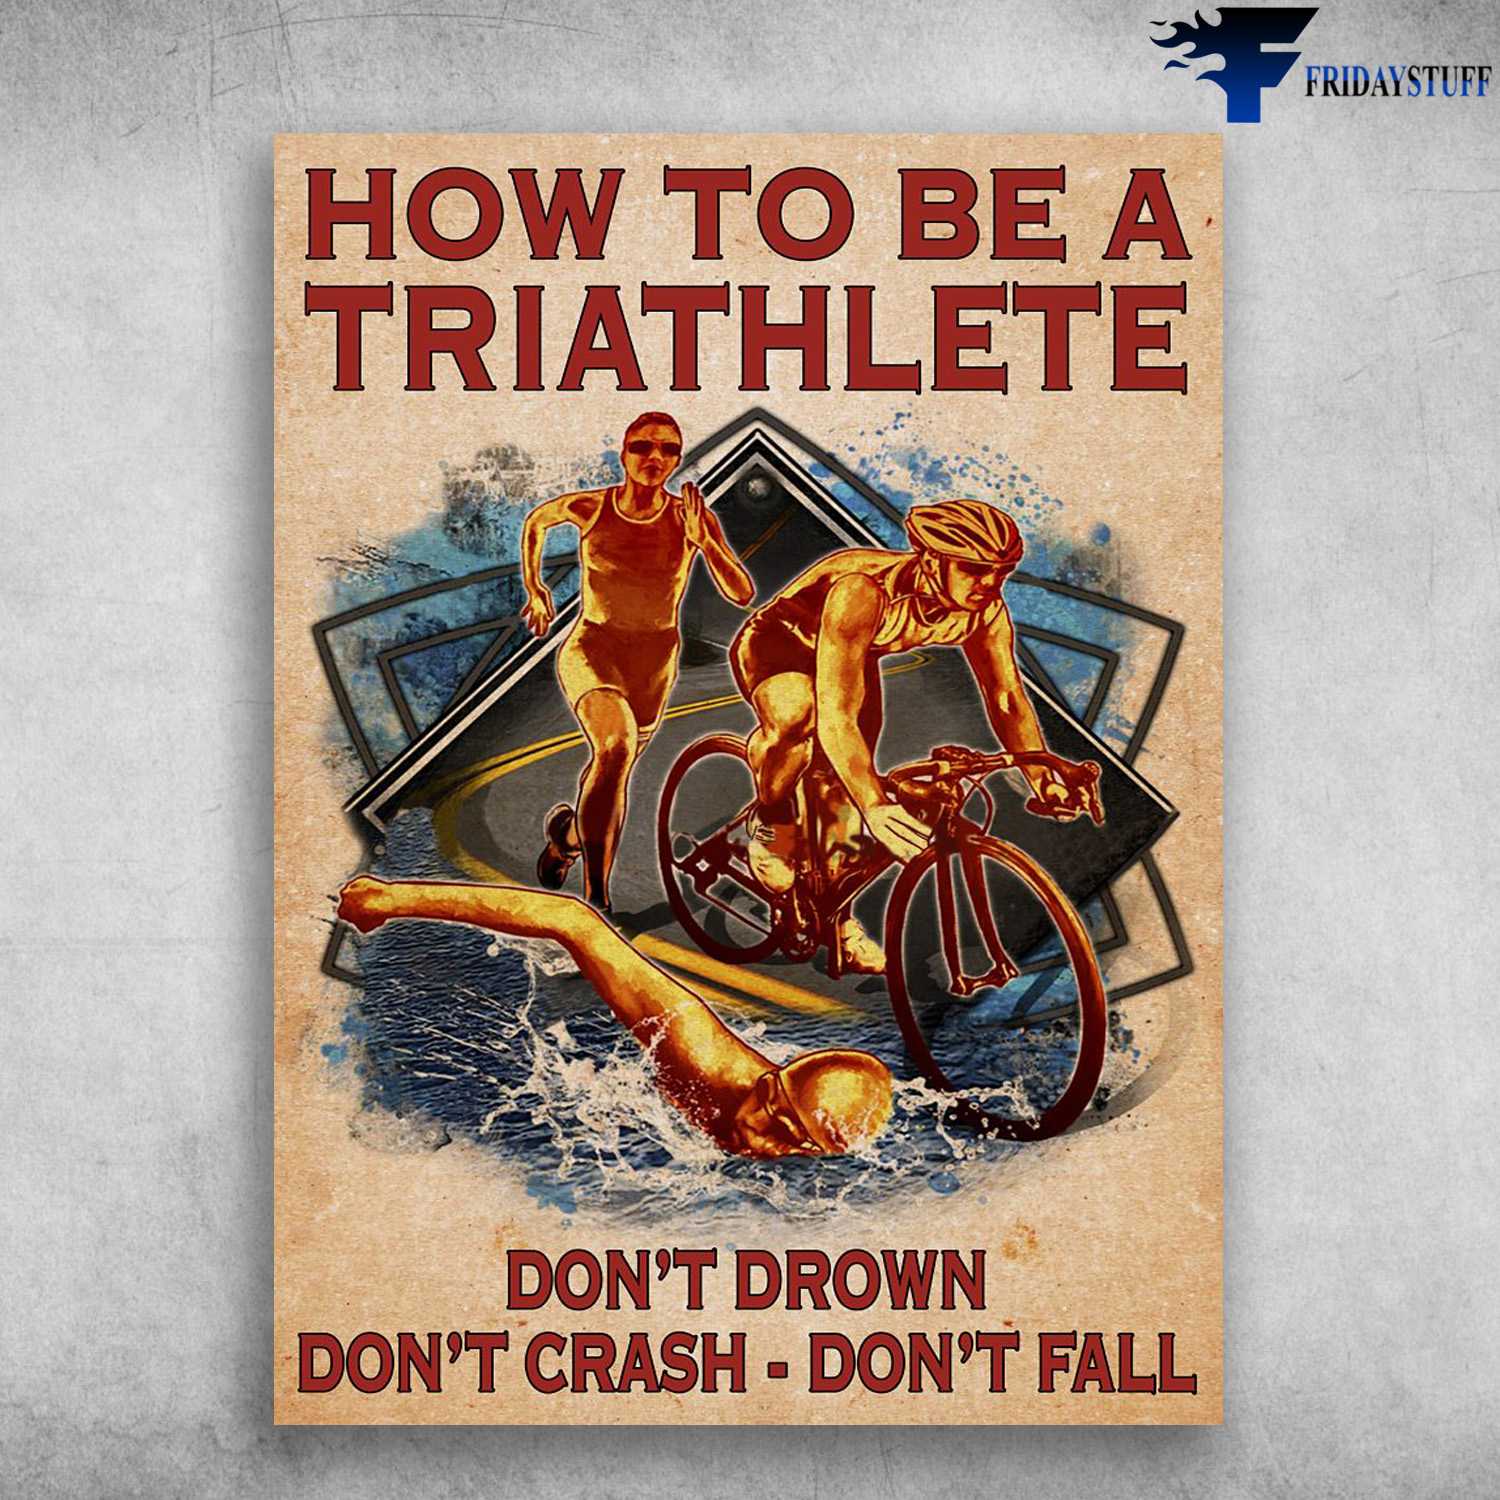 Running, Cycling, Swimming, How To Be A Triathlete, Don't Drown, Don't Crash, Don't Fall